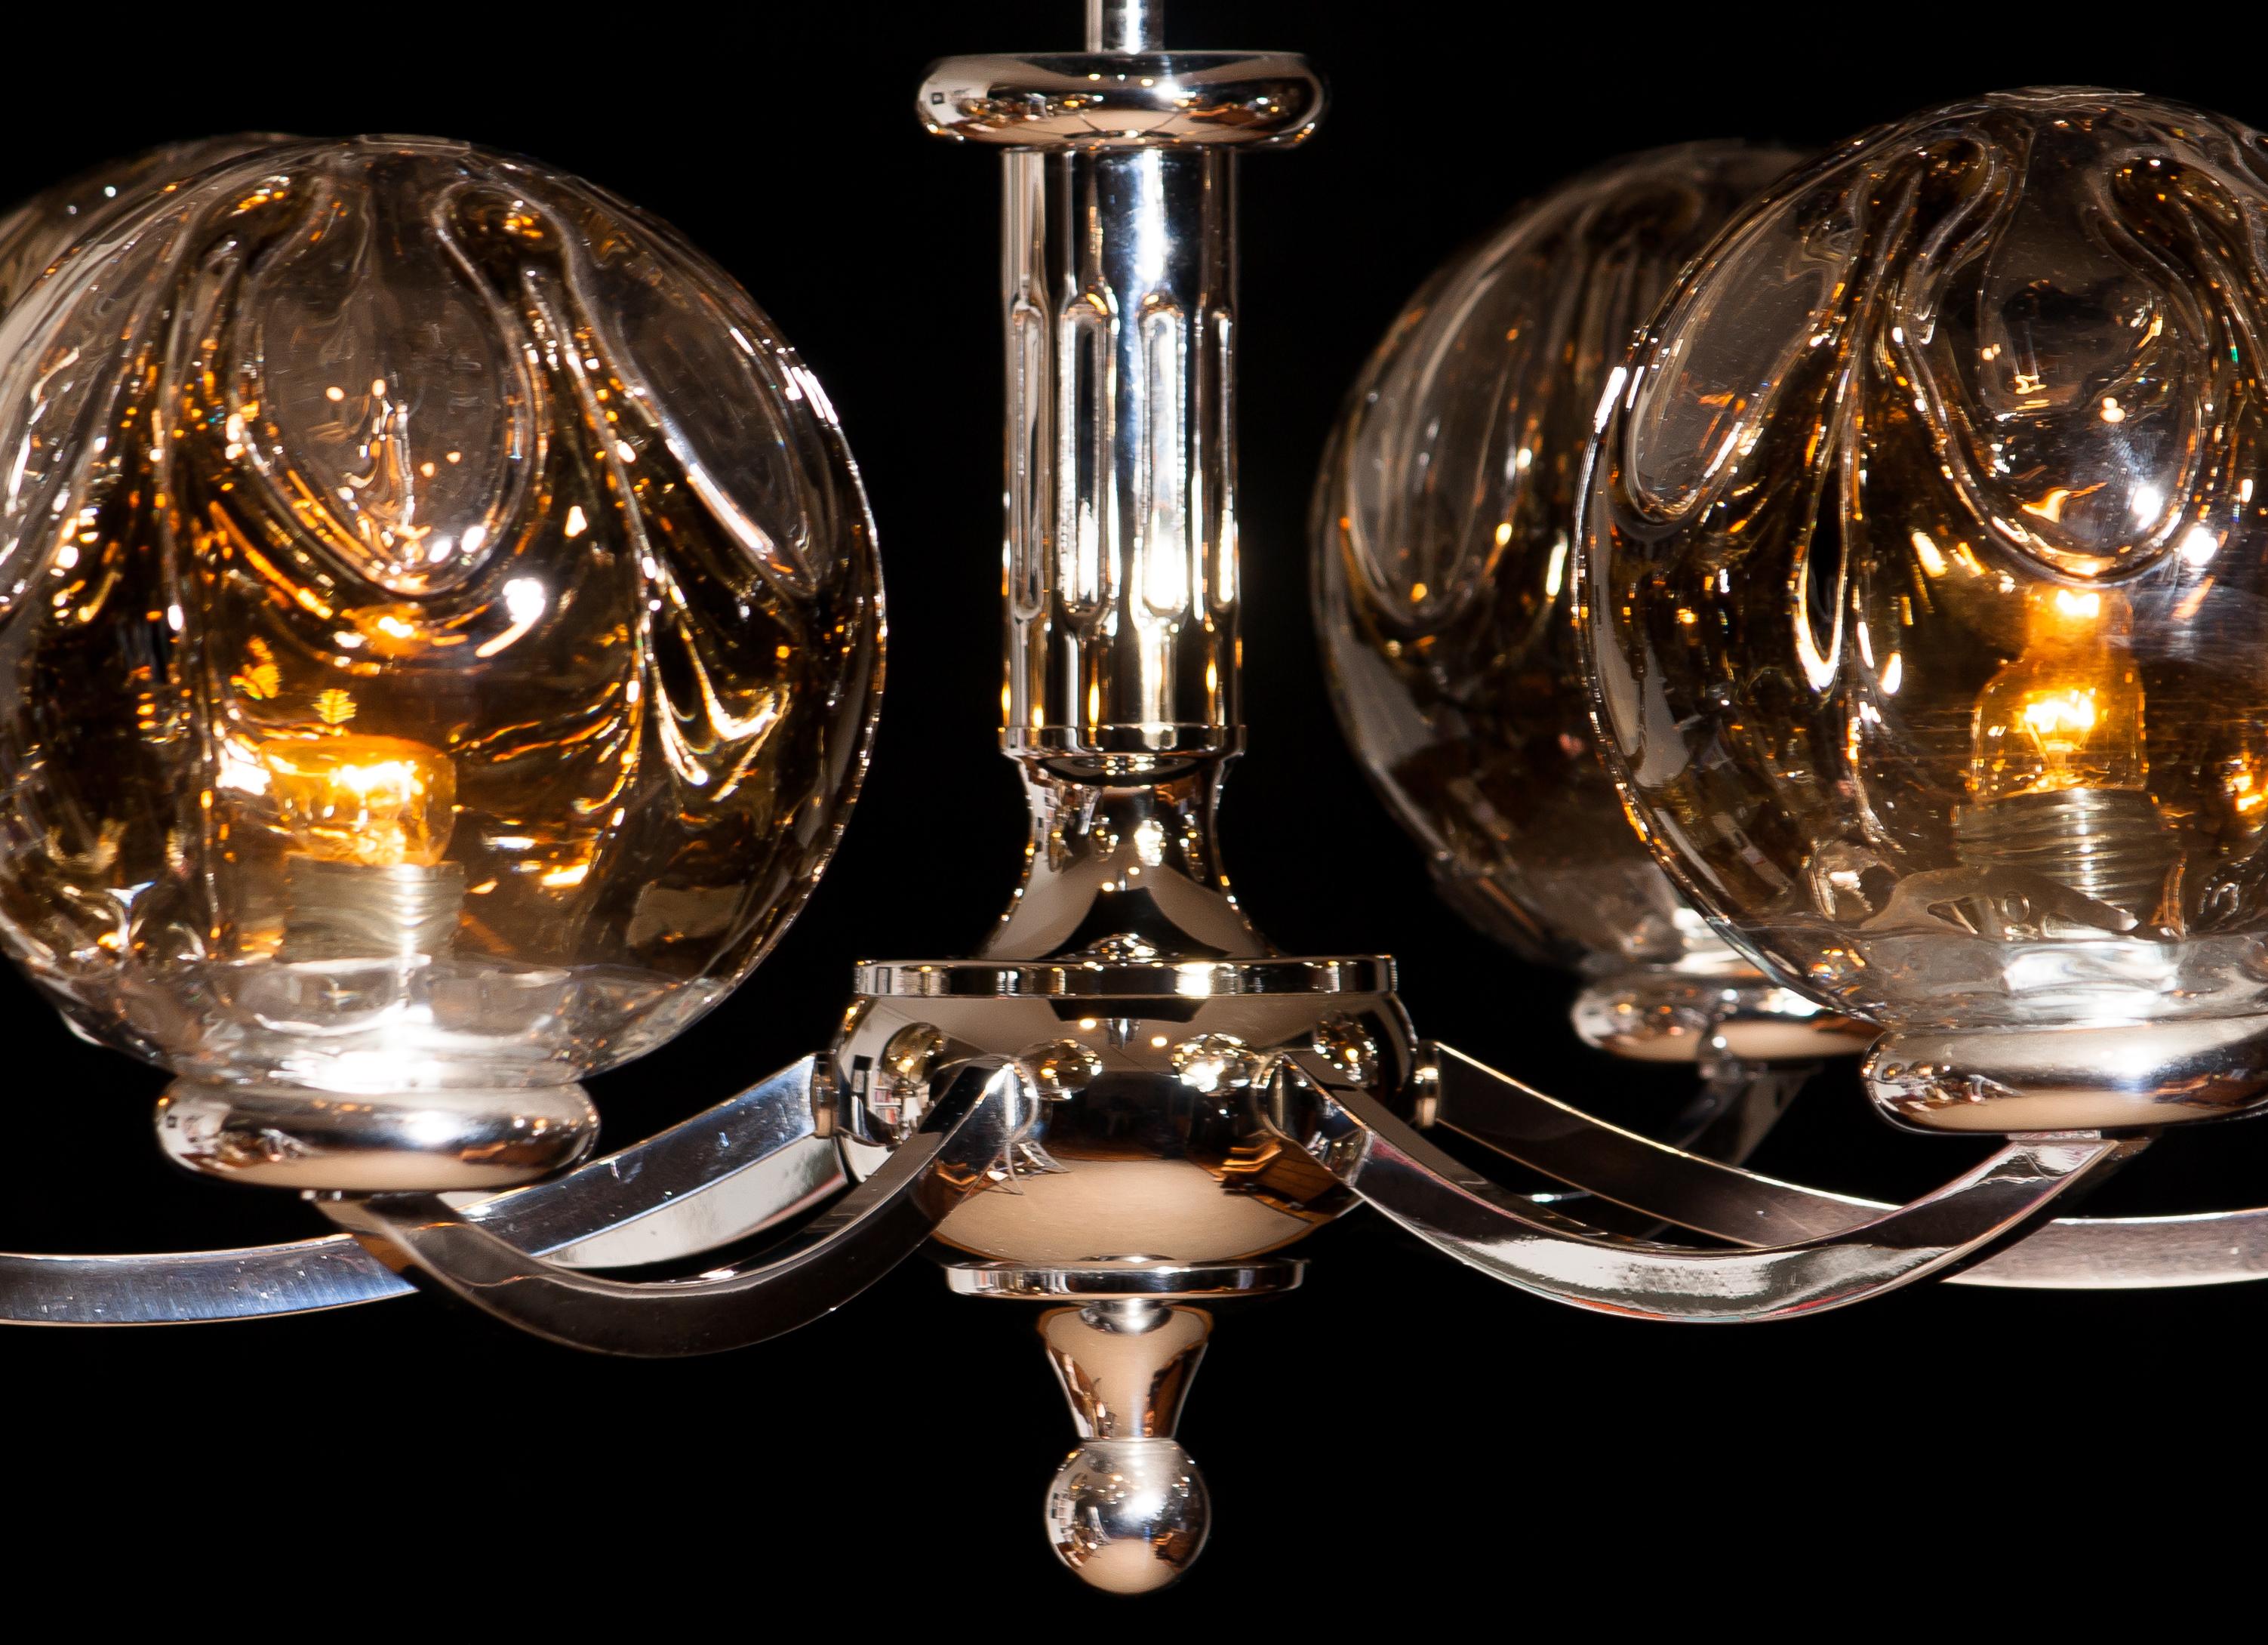 Exceptional beautiful chandelier made by Kaiser Leuchten in excellent condition.
This chandelier with the six original 